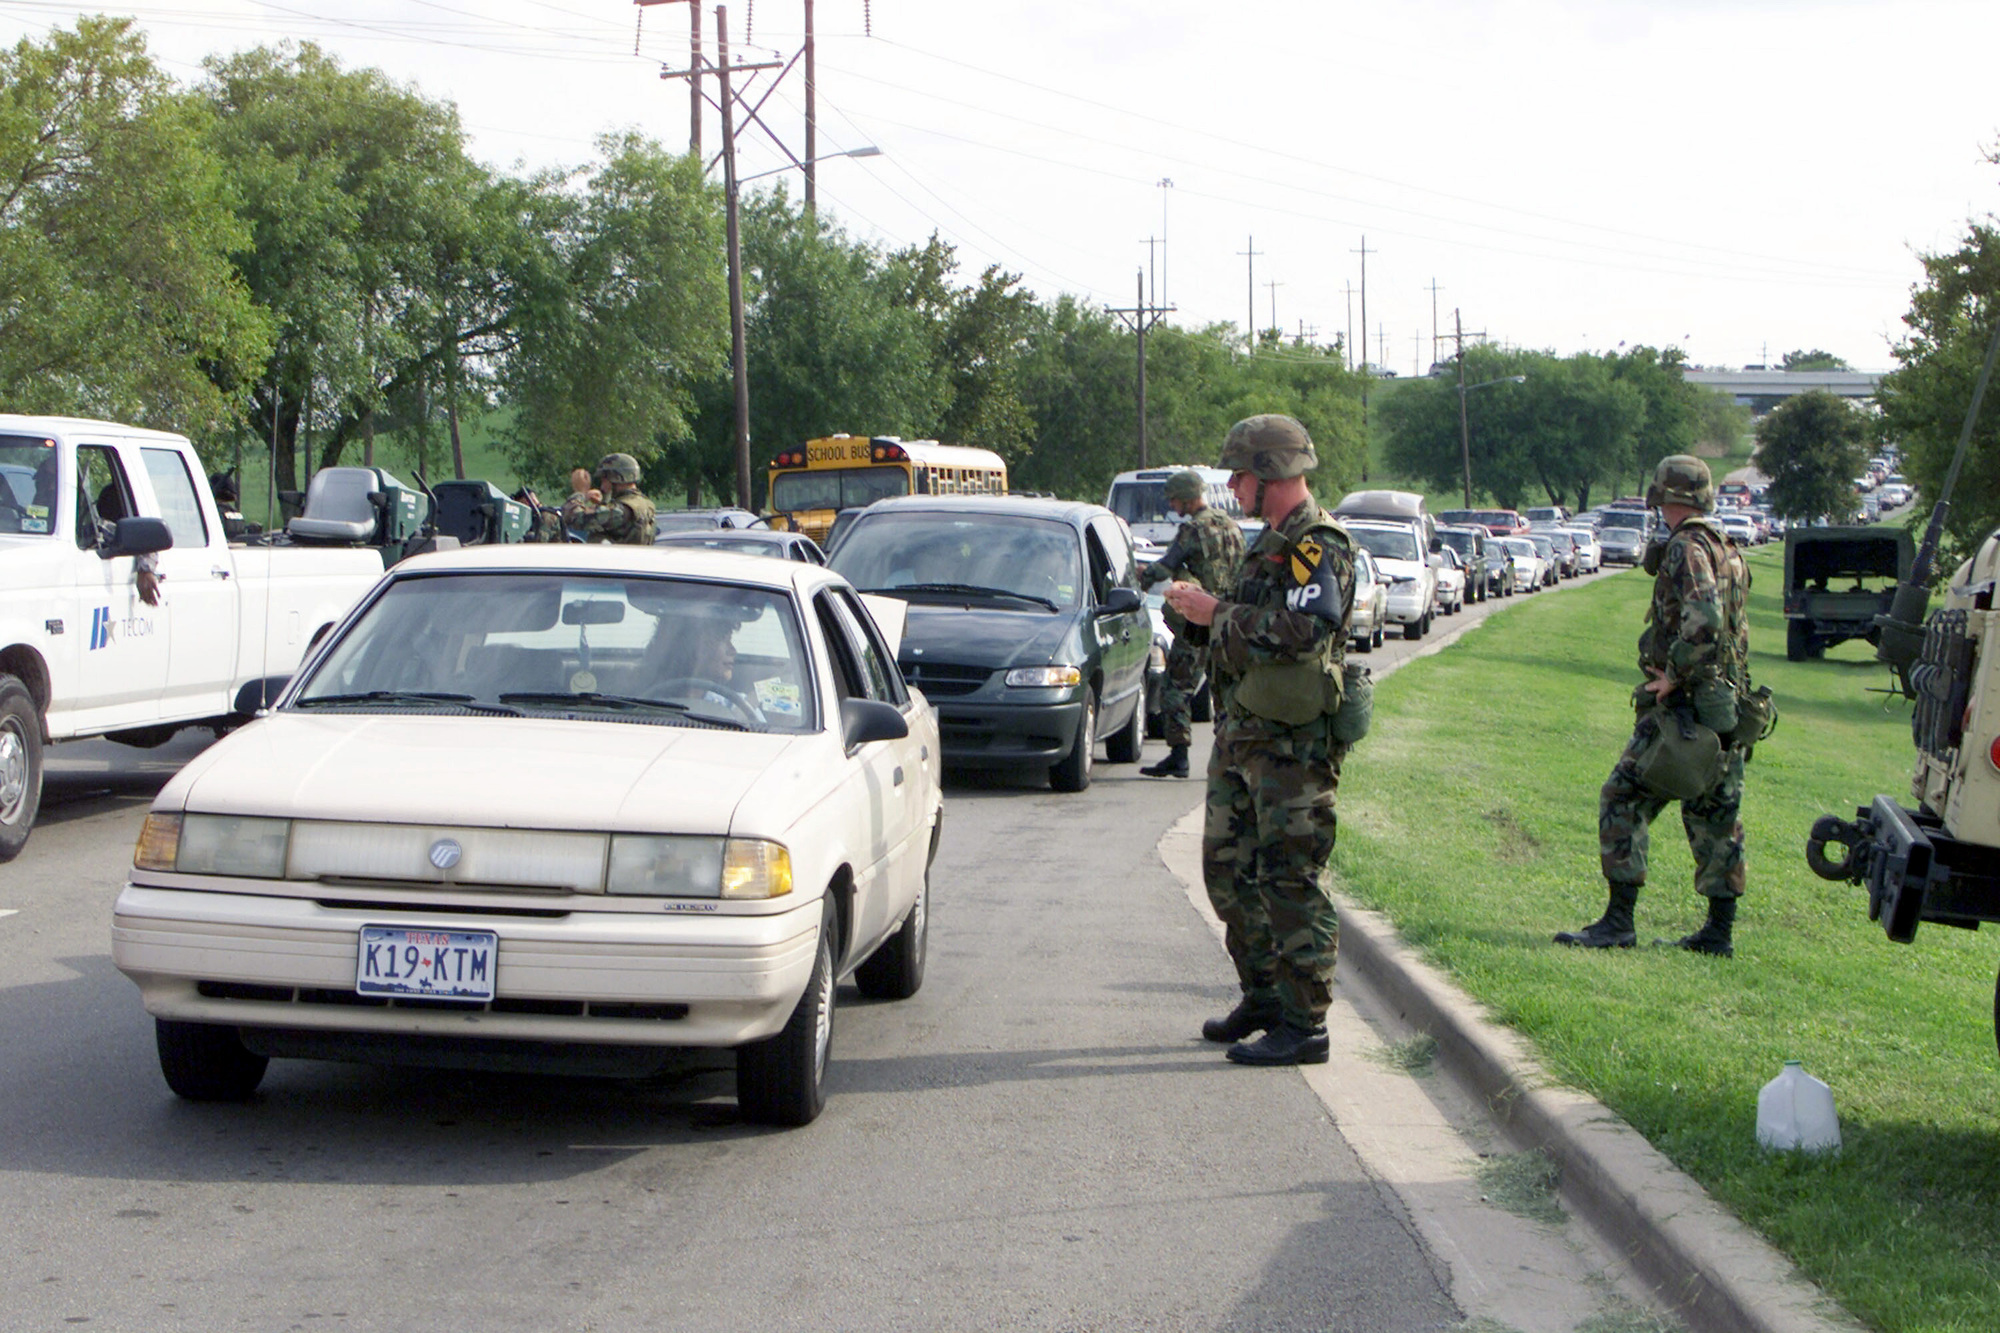 ry_Police%2C_search_vehicles_before_entering_the_main_gate_at_Fort_Hood%2C_TX_010911-A-LE352-003.jpg